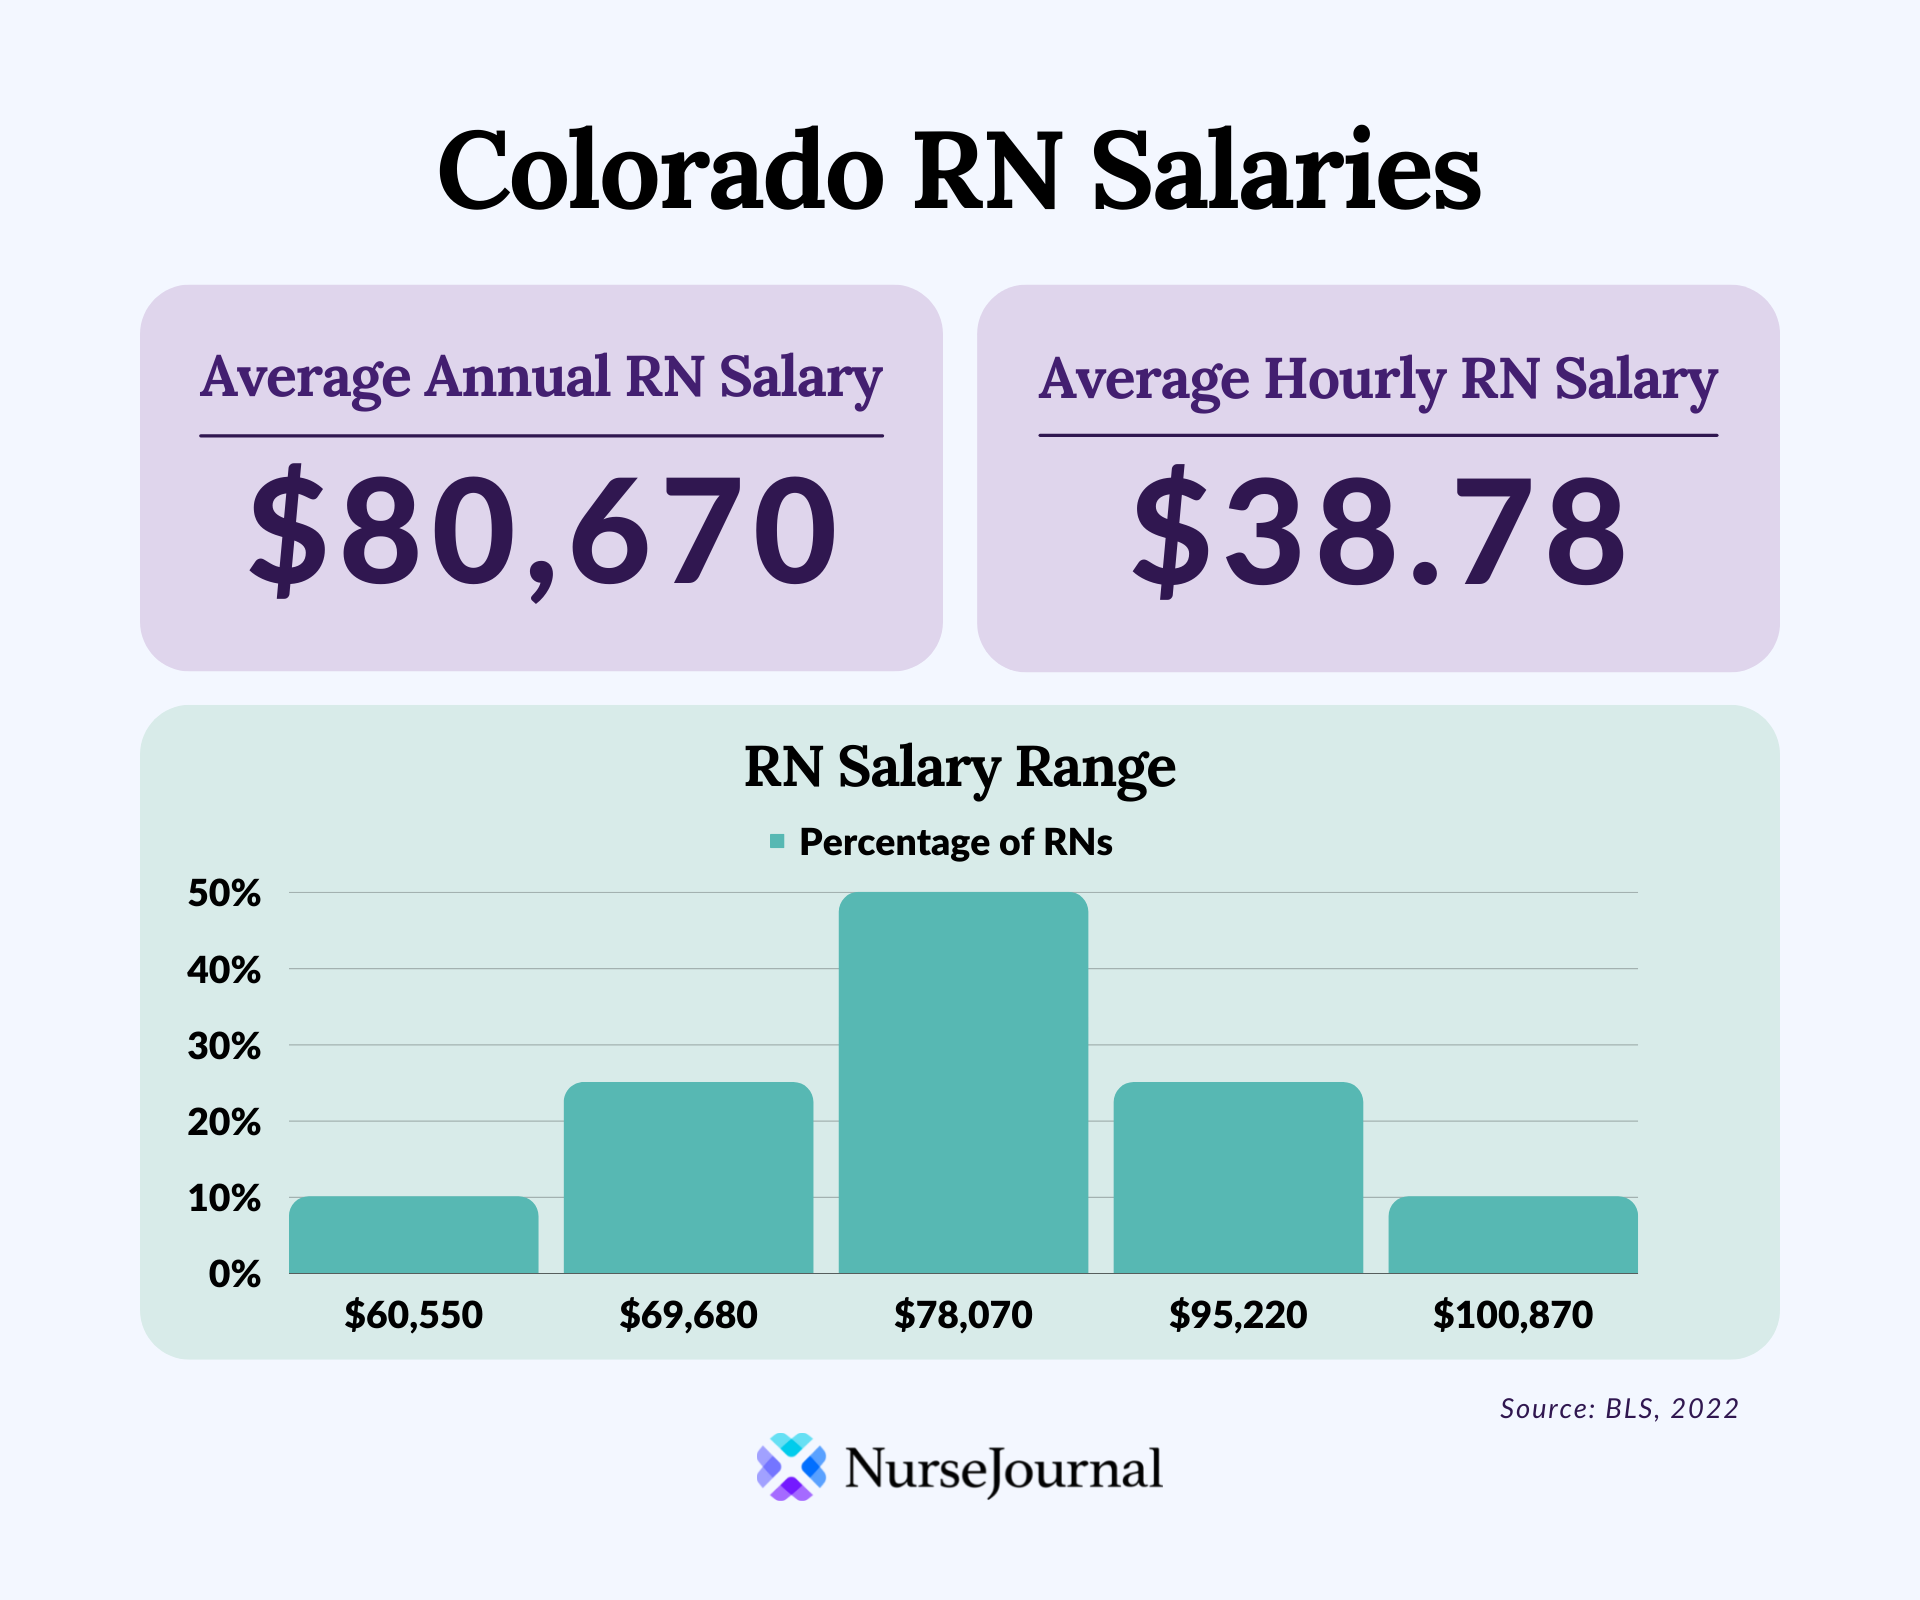 Infographic of registered nursing salary data in Colorado. The average annual RN salary is $80,670. The average hourly RN salary is $38.78. Average RN salaries range from $60,550 among the bottom 10th percentile of earners to $100,870 among the top 90th percentile of earners.